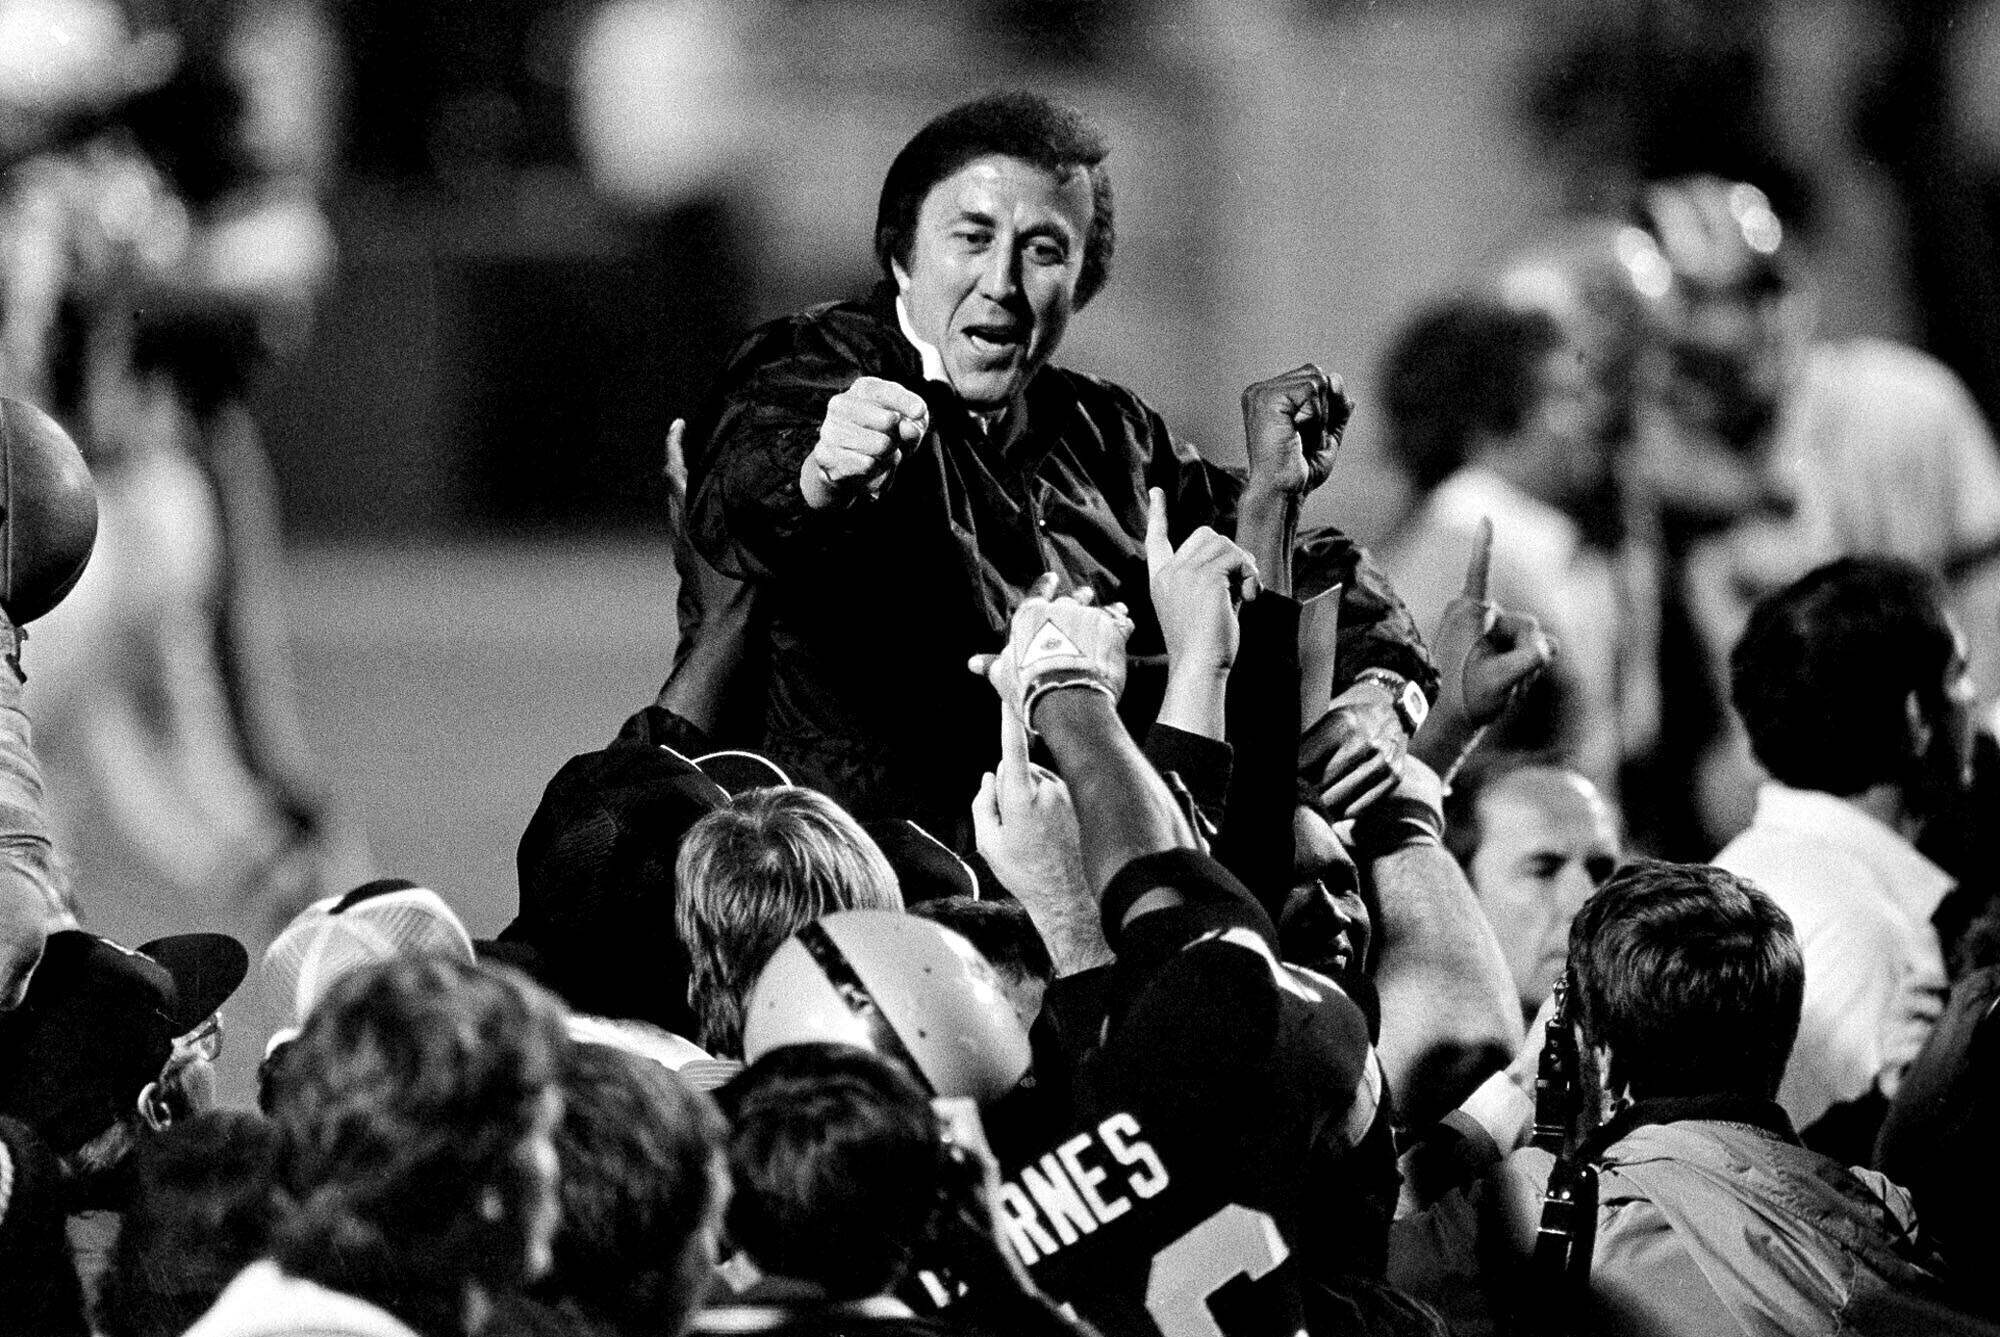 Tom Flores quietly busted down barriers for Latinos in the NFL